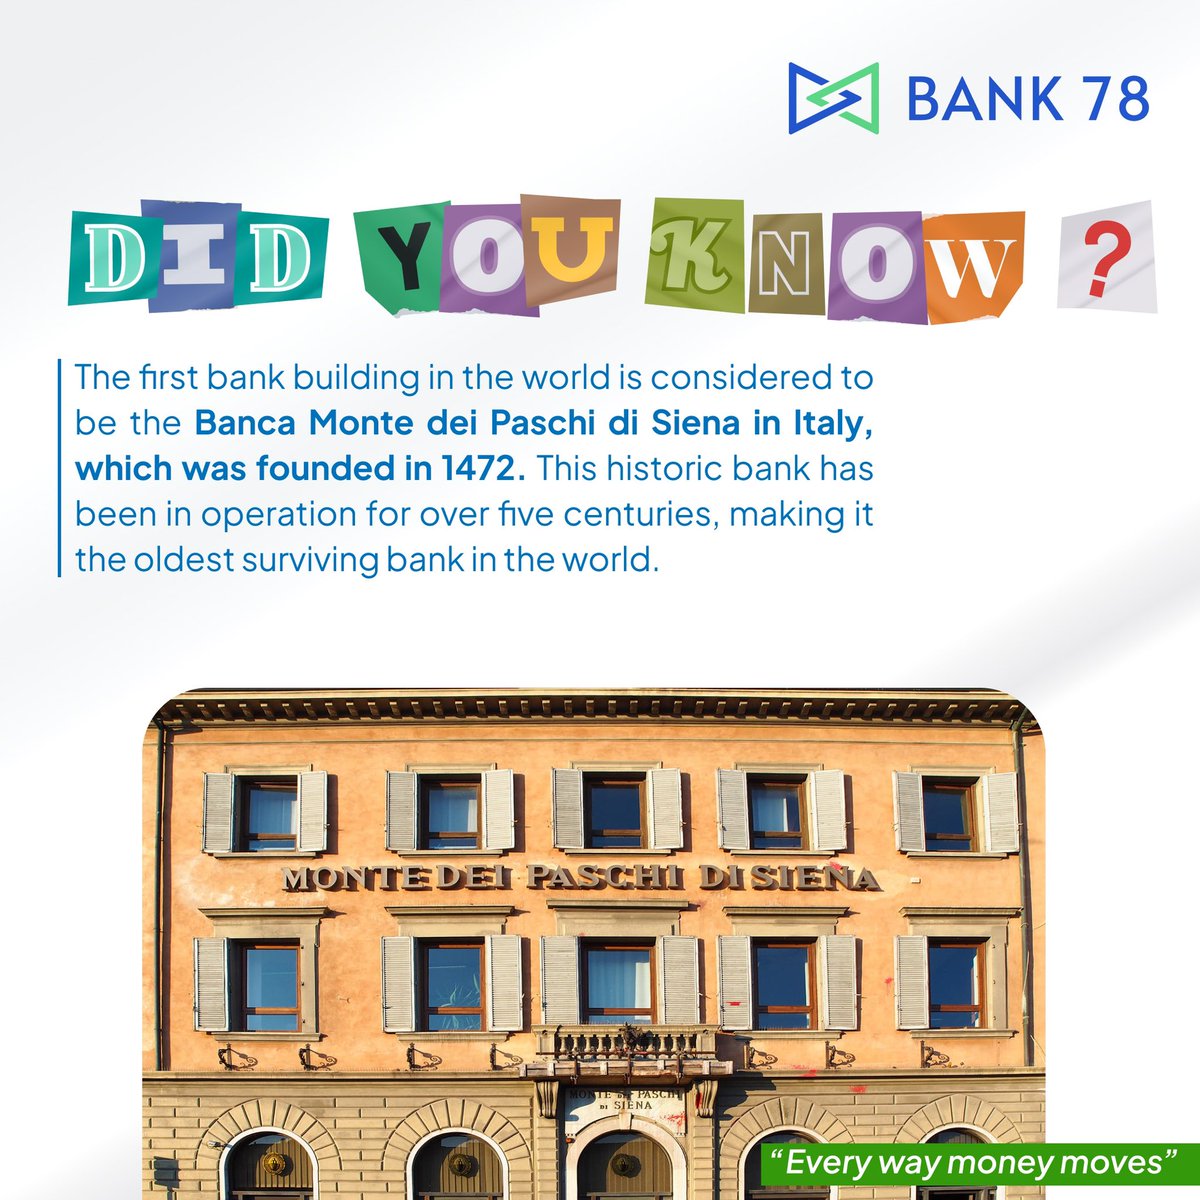 💡 Did you know? 

The first bank building in the world is the Banca Monte dei Paschi di Siena in Italy, founded in 1472! 🌍🏦 

#Bank78
#EveryWayMoneyMoves
#BankingHistory 
#DidYouKnow